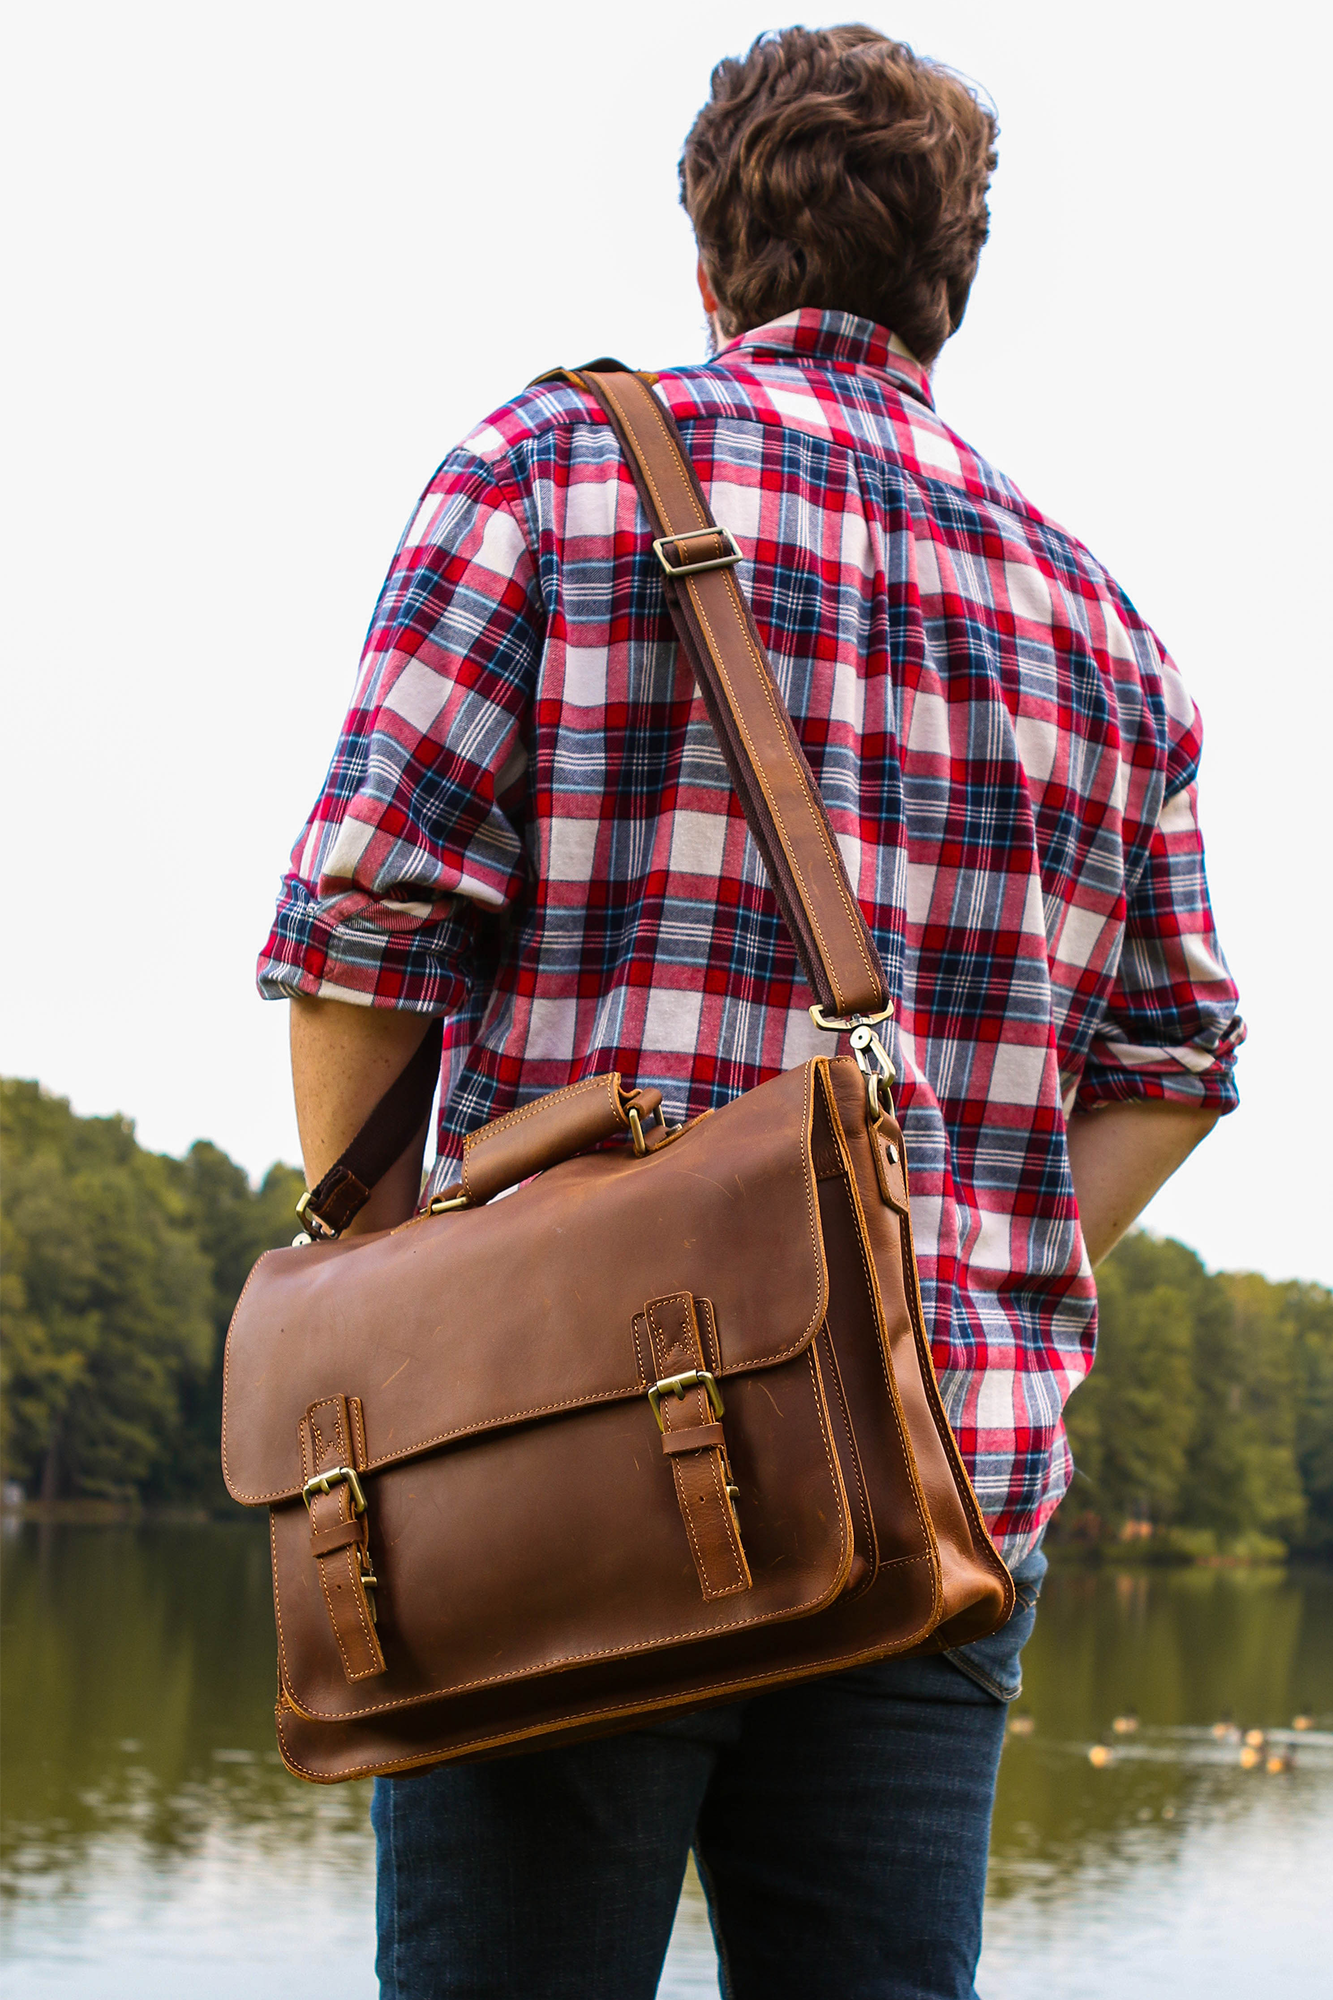 This smart new leather record bag fits your everyday needs